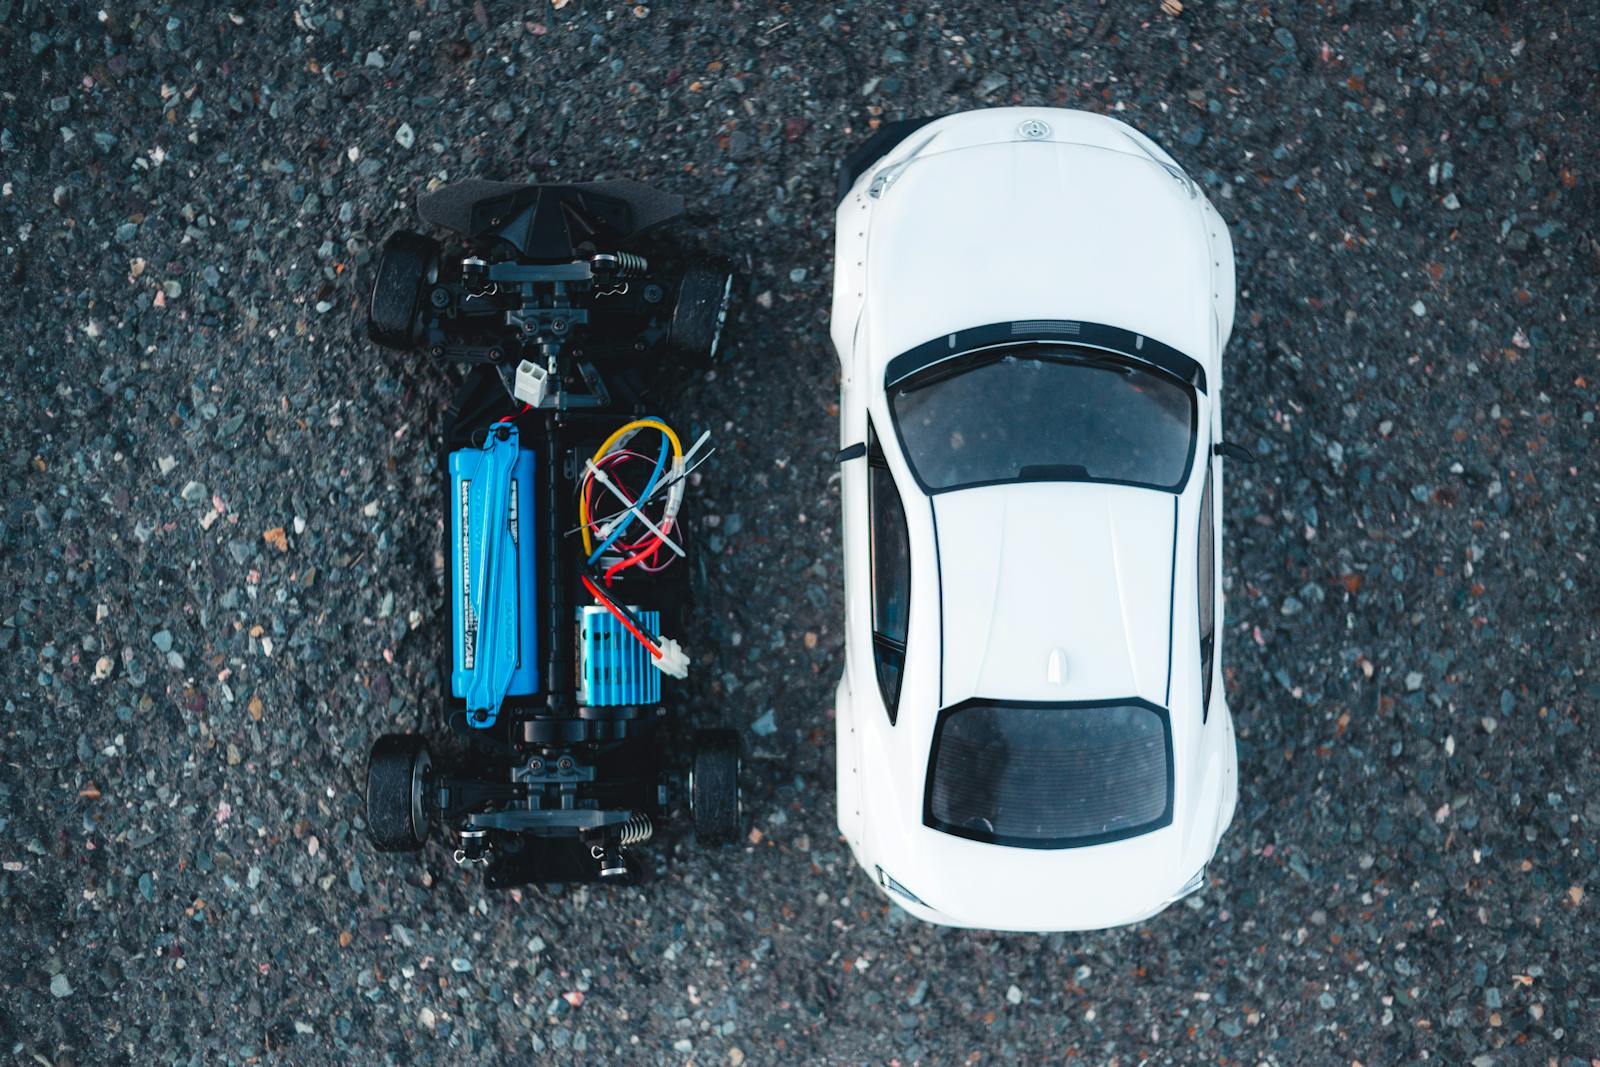 Top View of Toy Cars